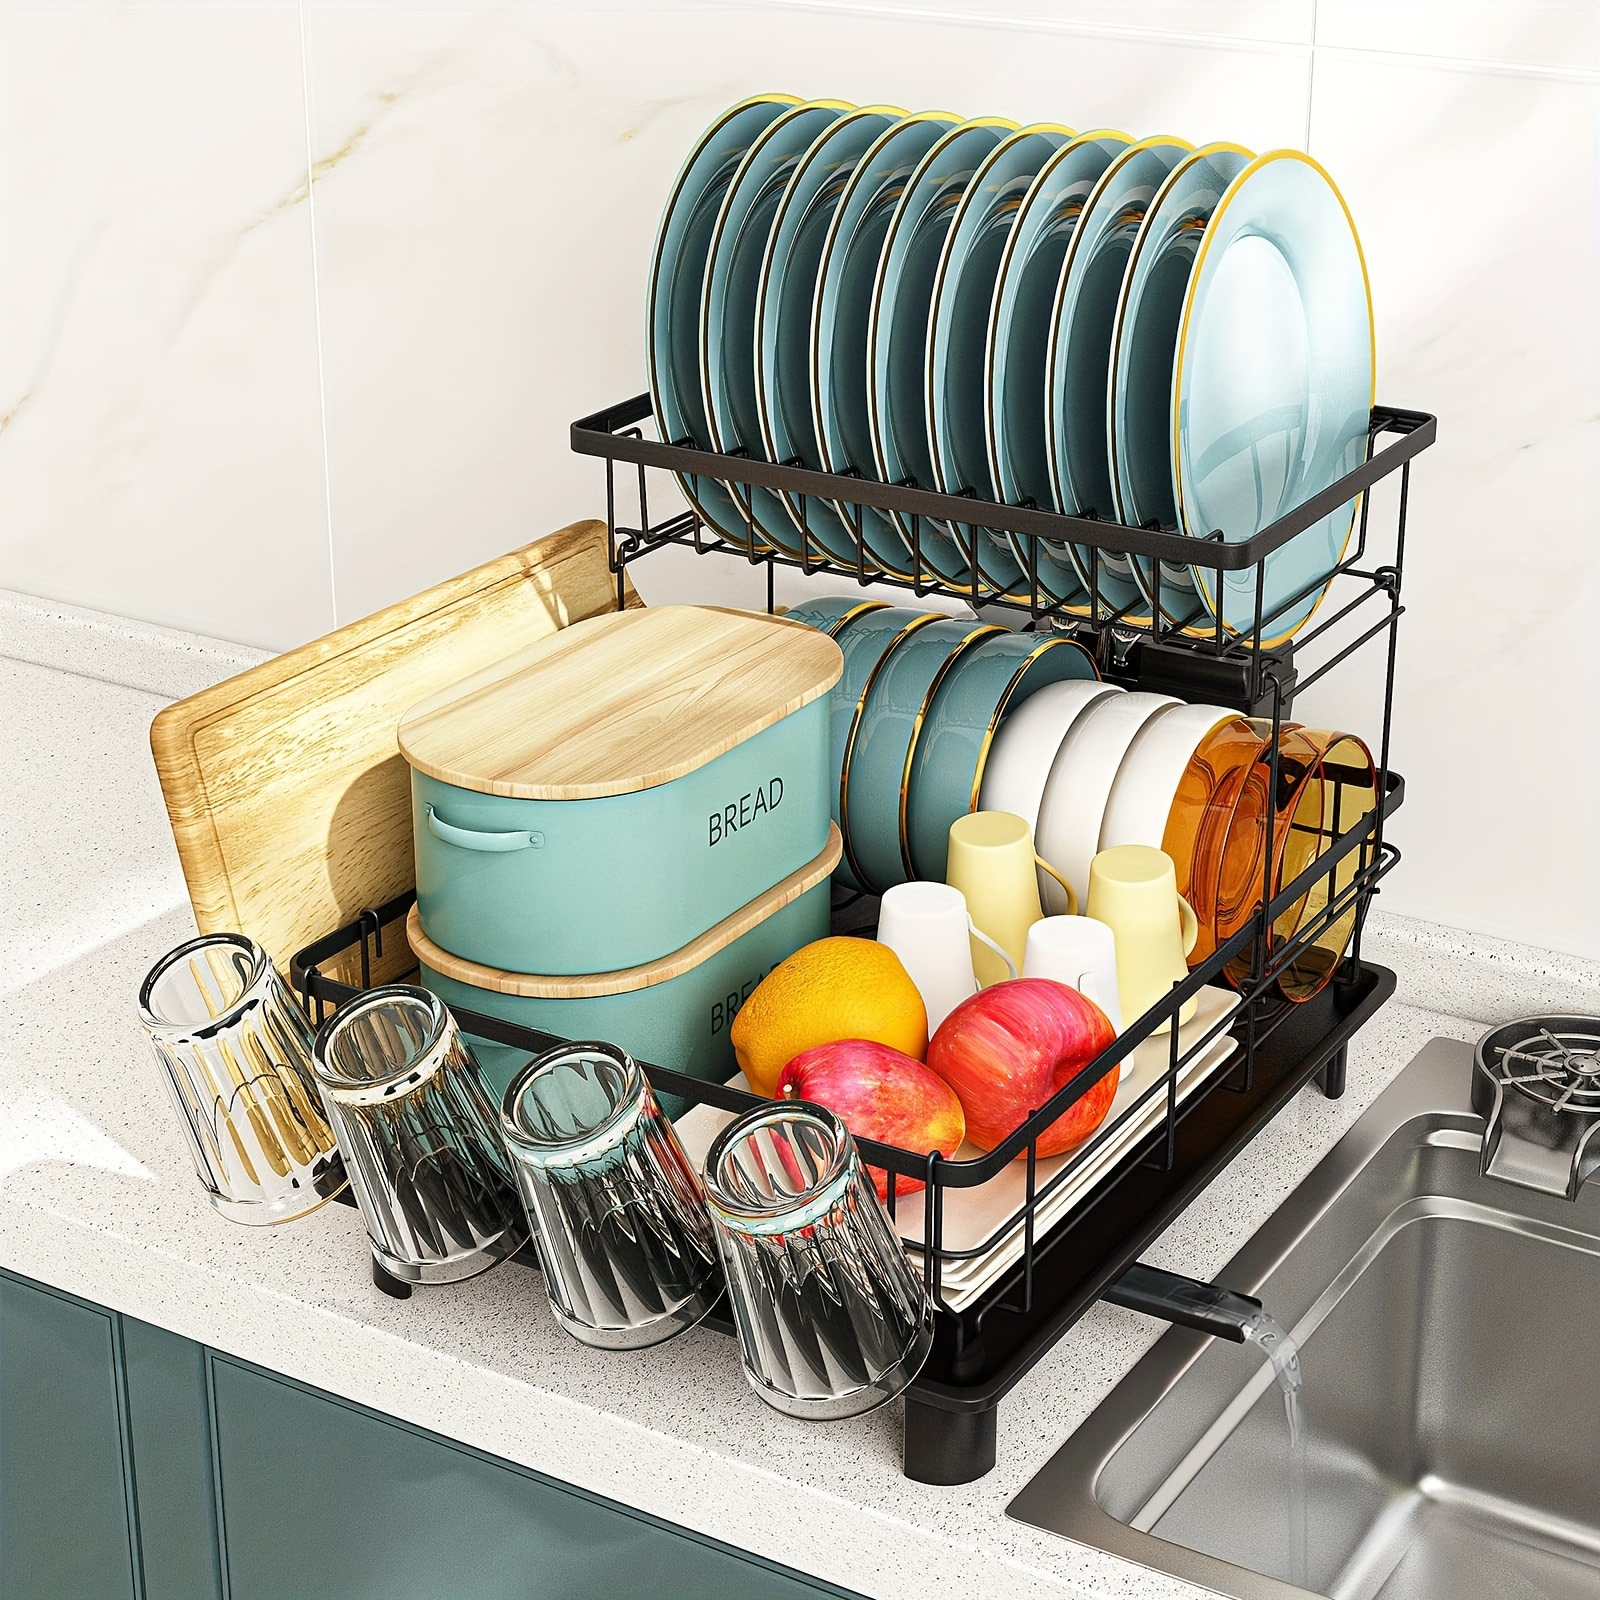 Dish Drainer Rack for In Sink or Counter Drying - Small